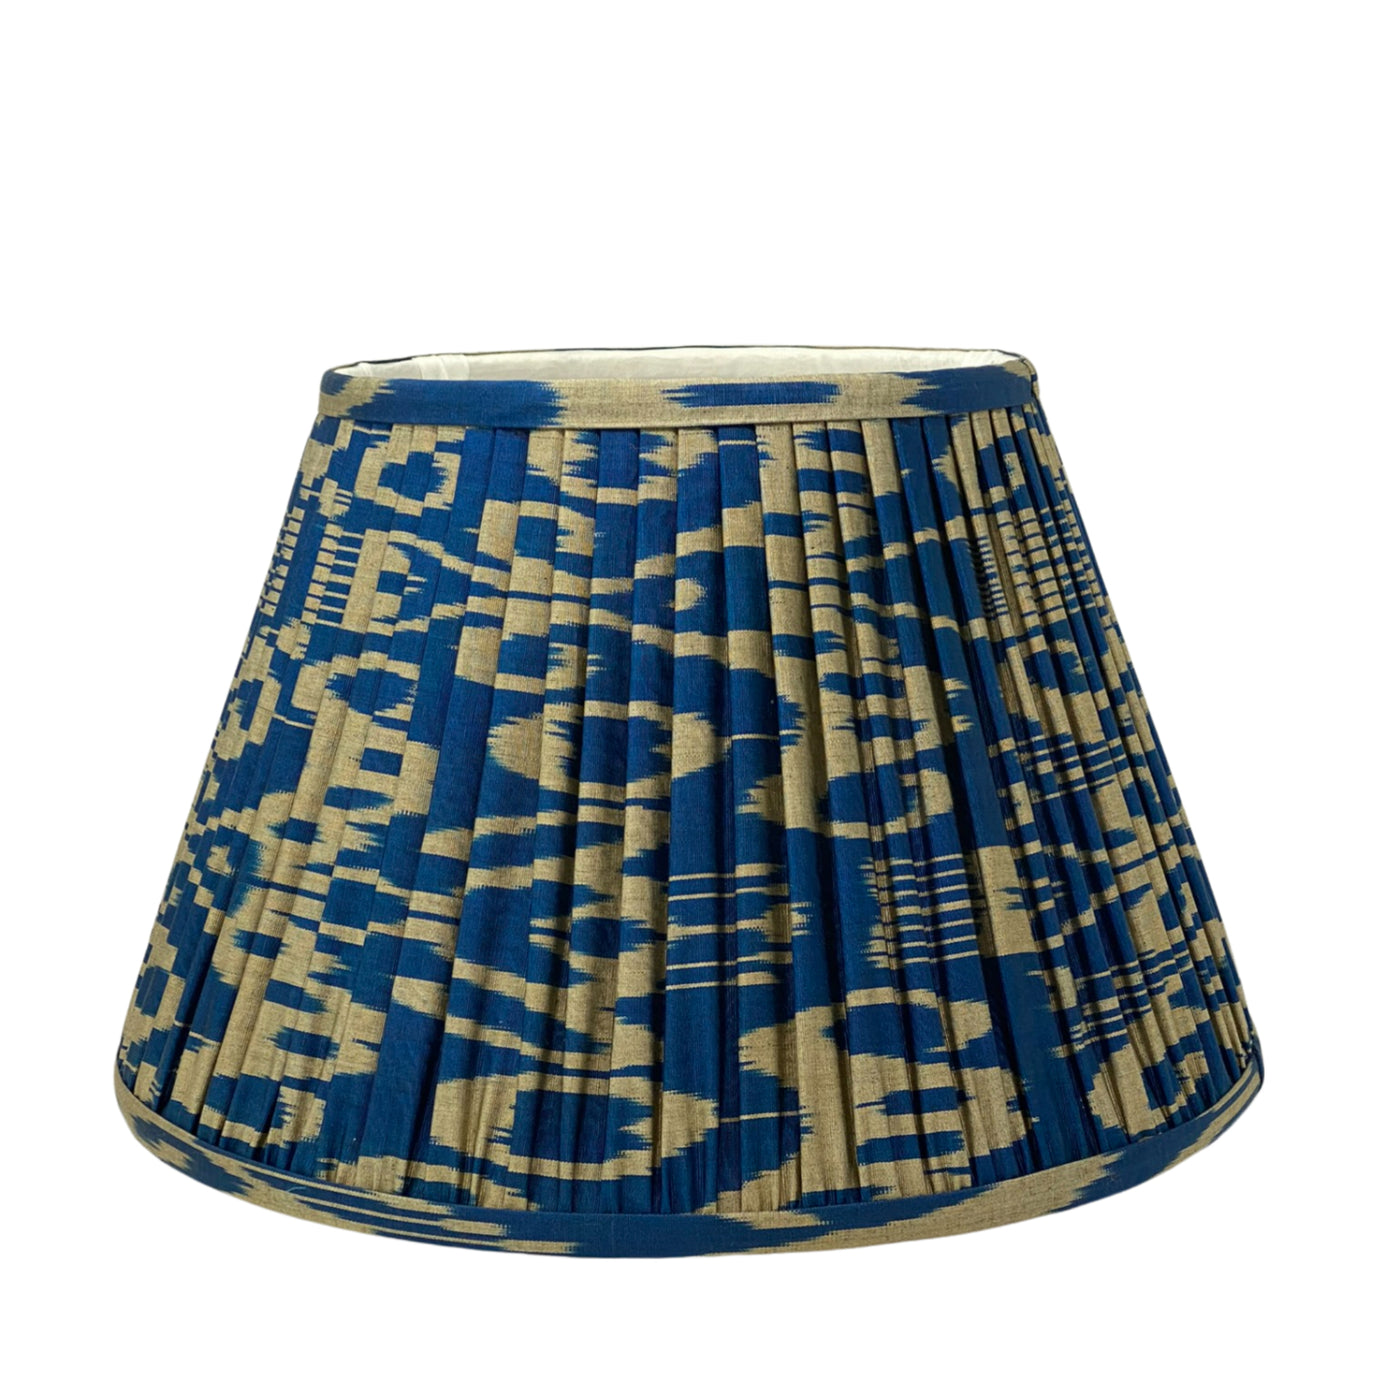 Blue and silver ikat lampshade